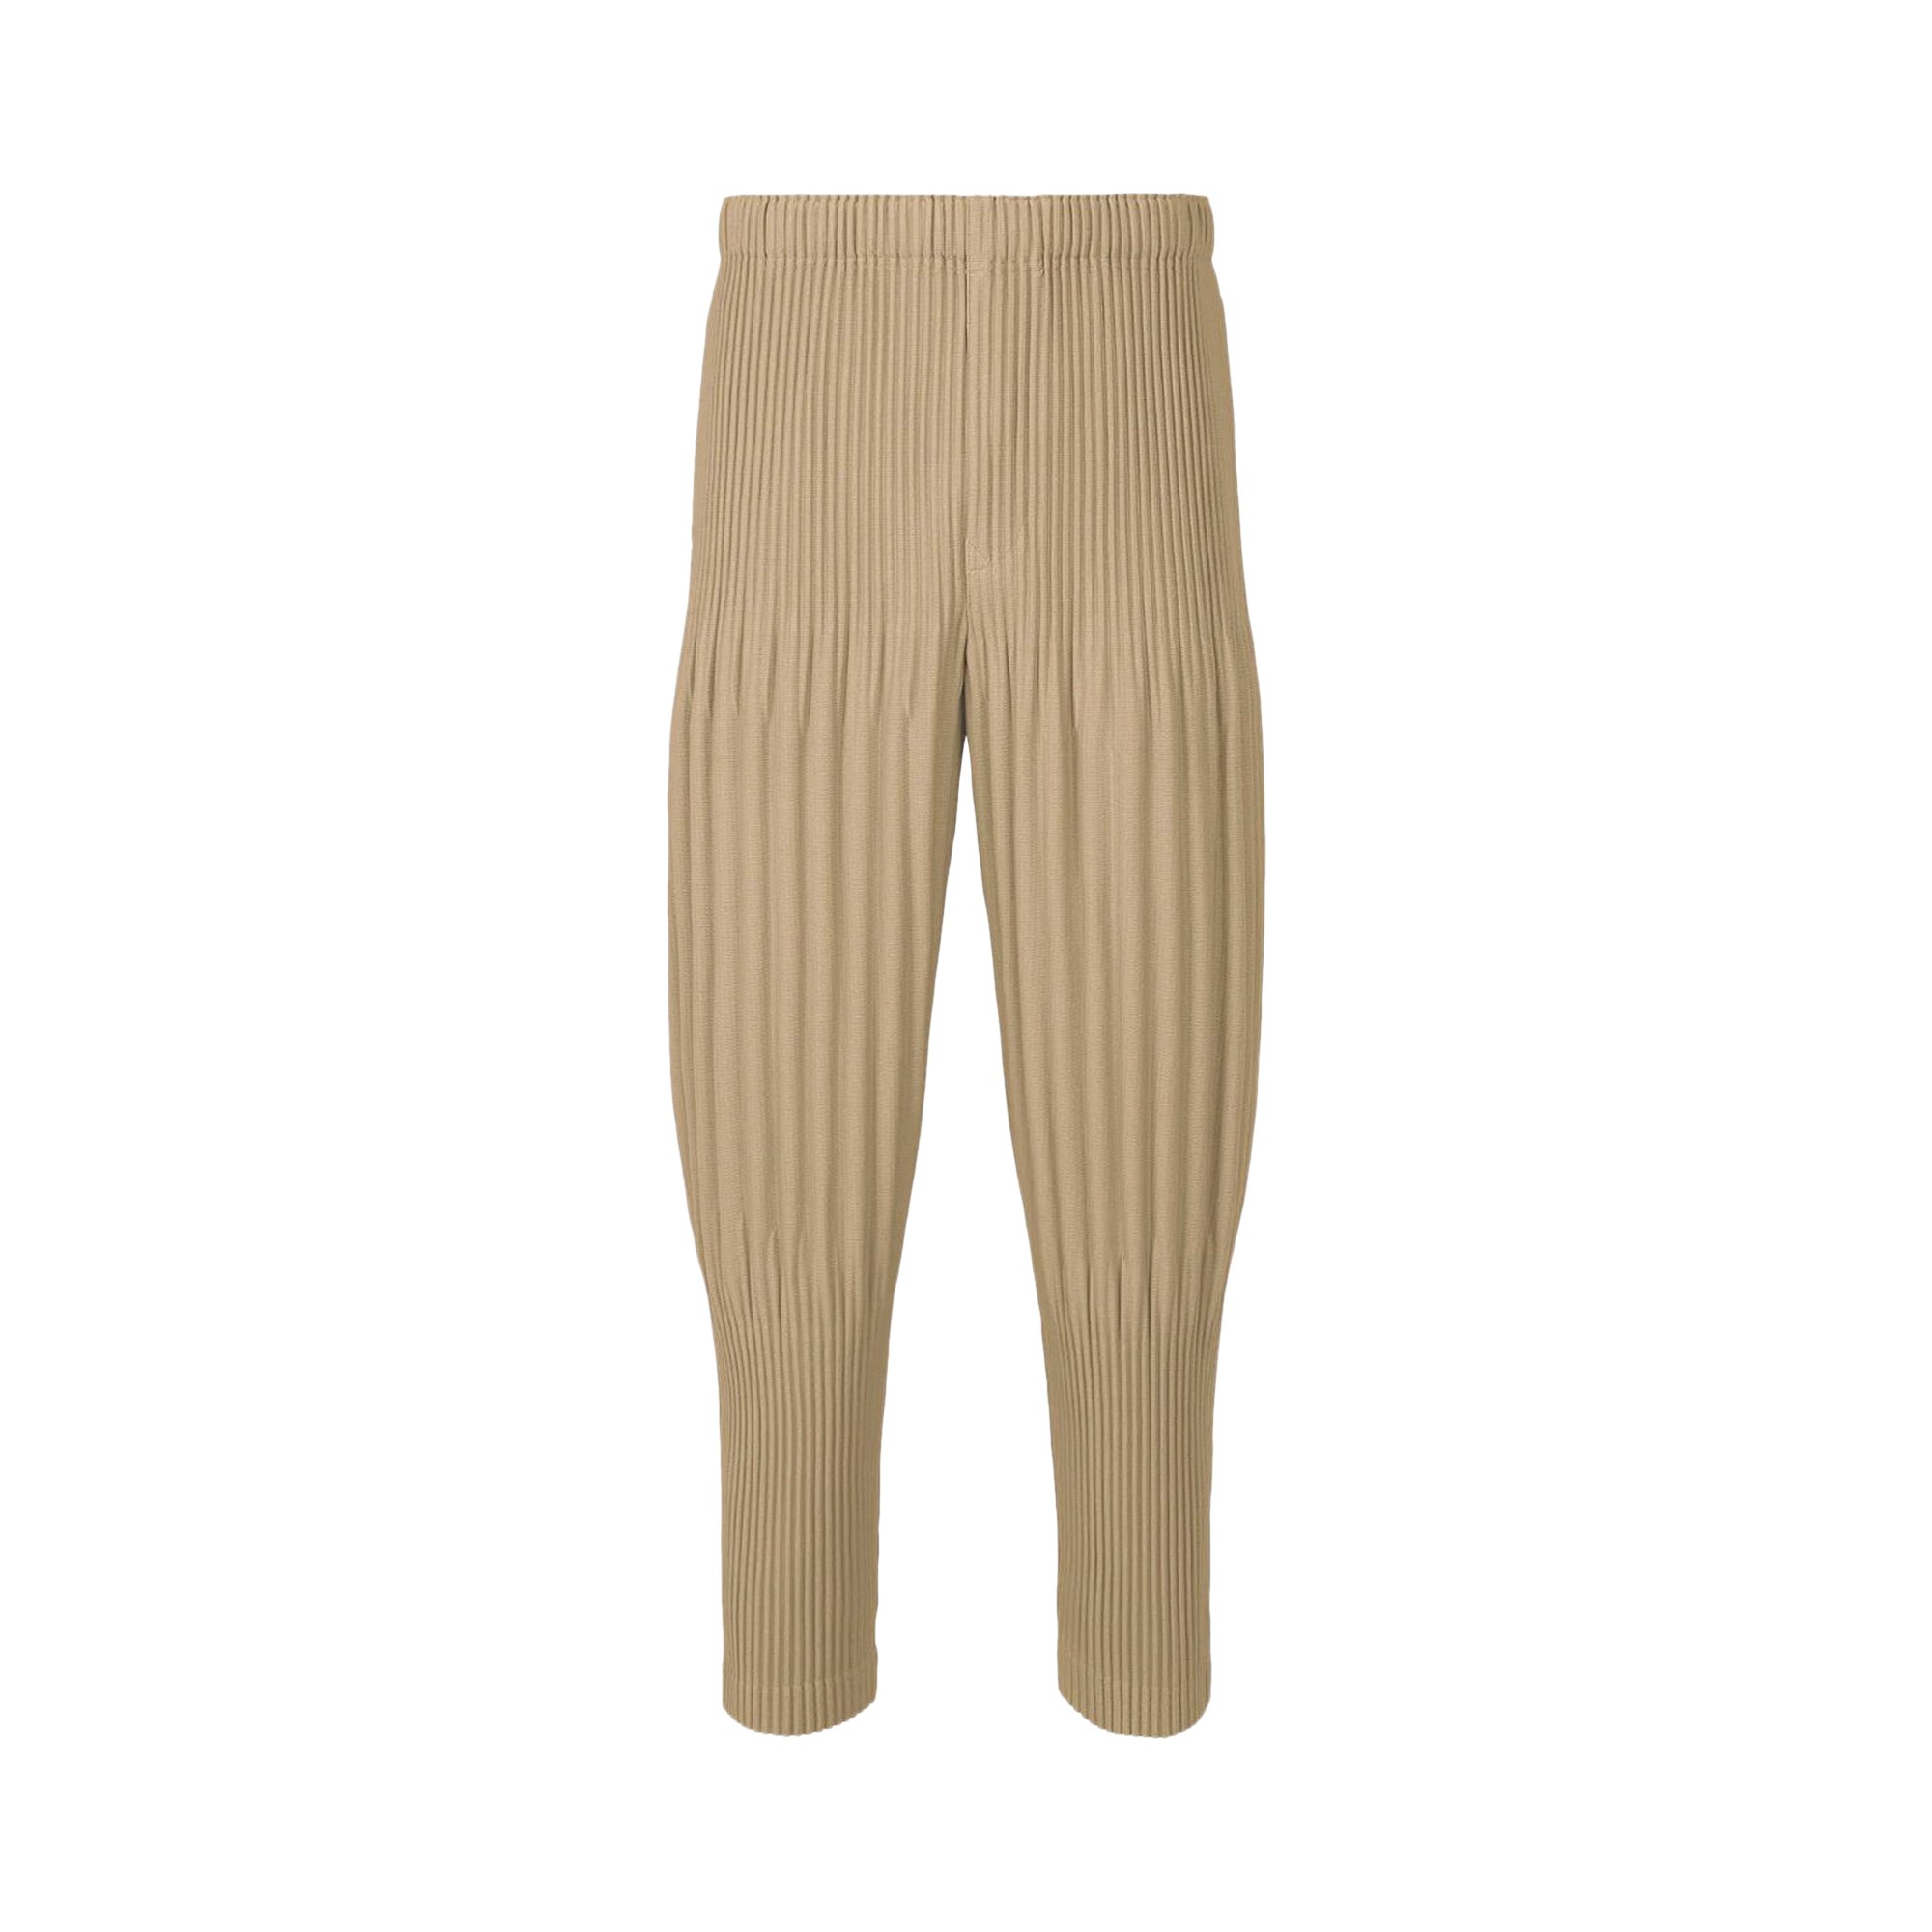 Issey Miyake Suit Trousers in Eggshell  Voo Store Berlin  Worldwide  Shipping